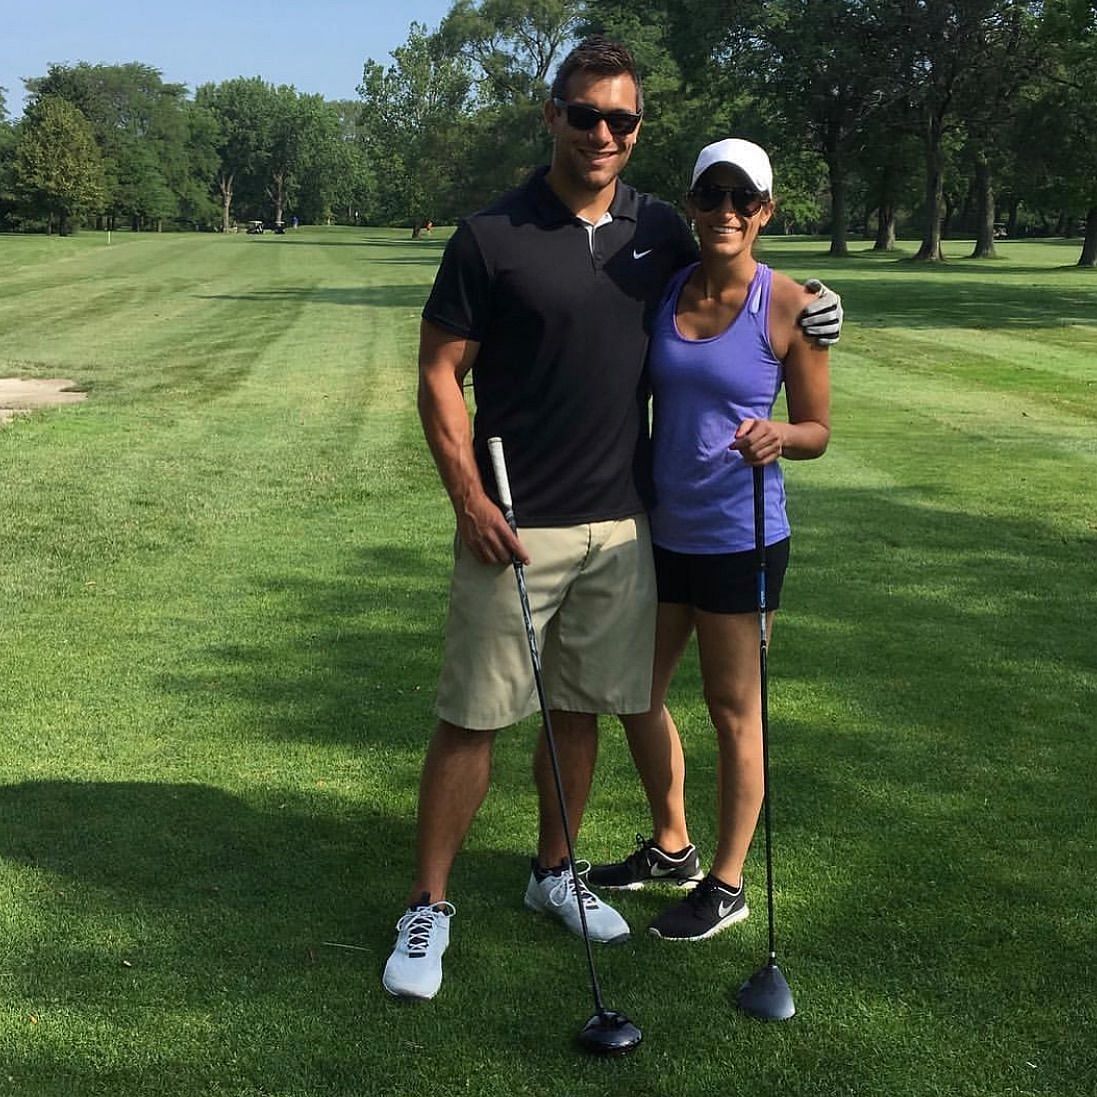 Mike And Briana playing golf